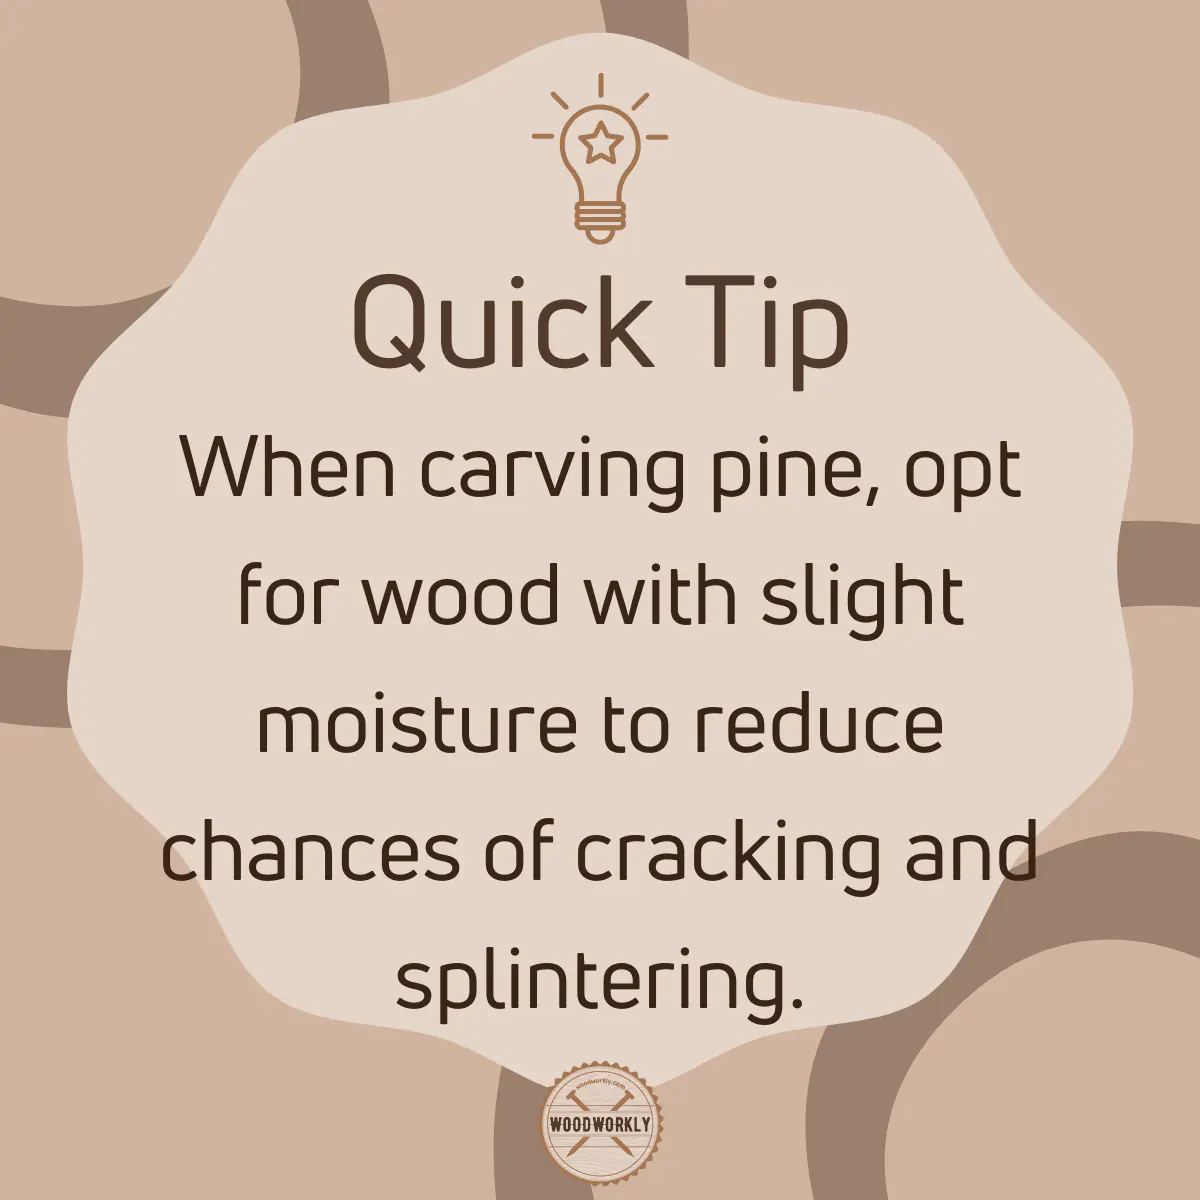 Tip for carving Pine wood